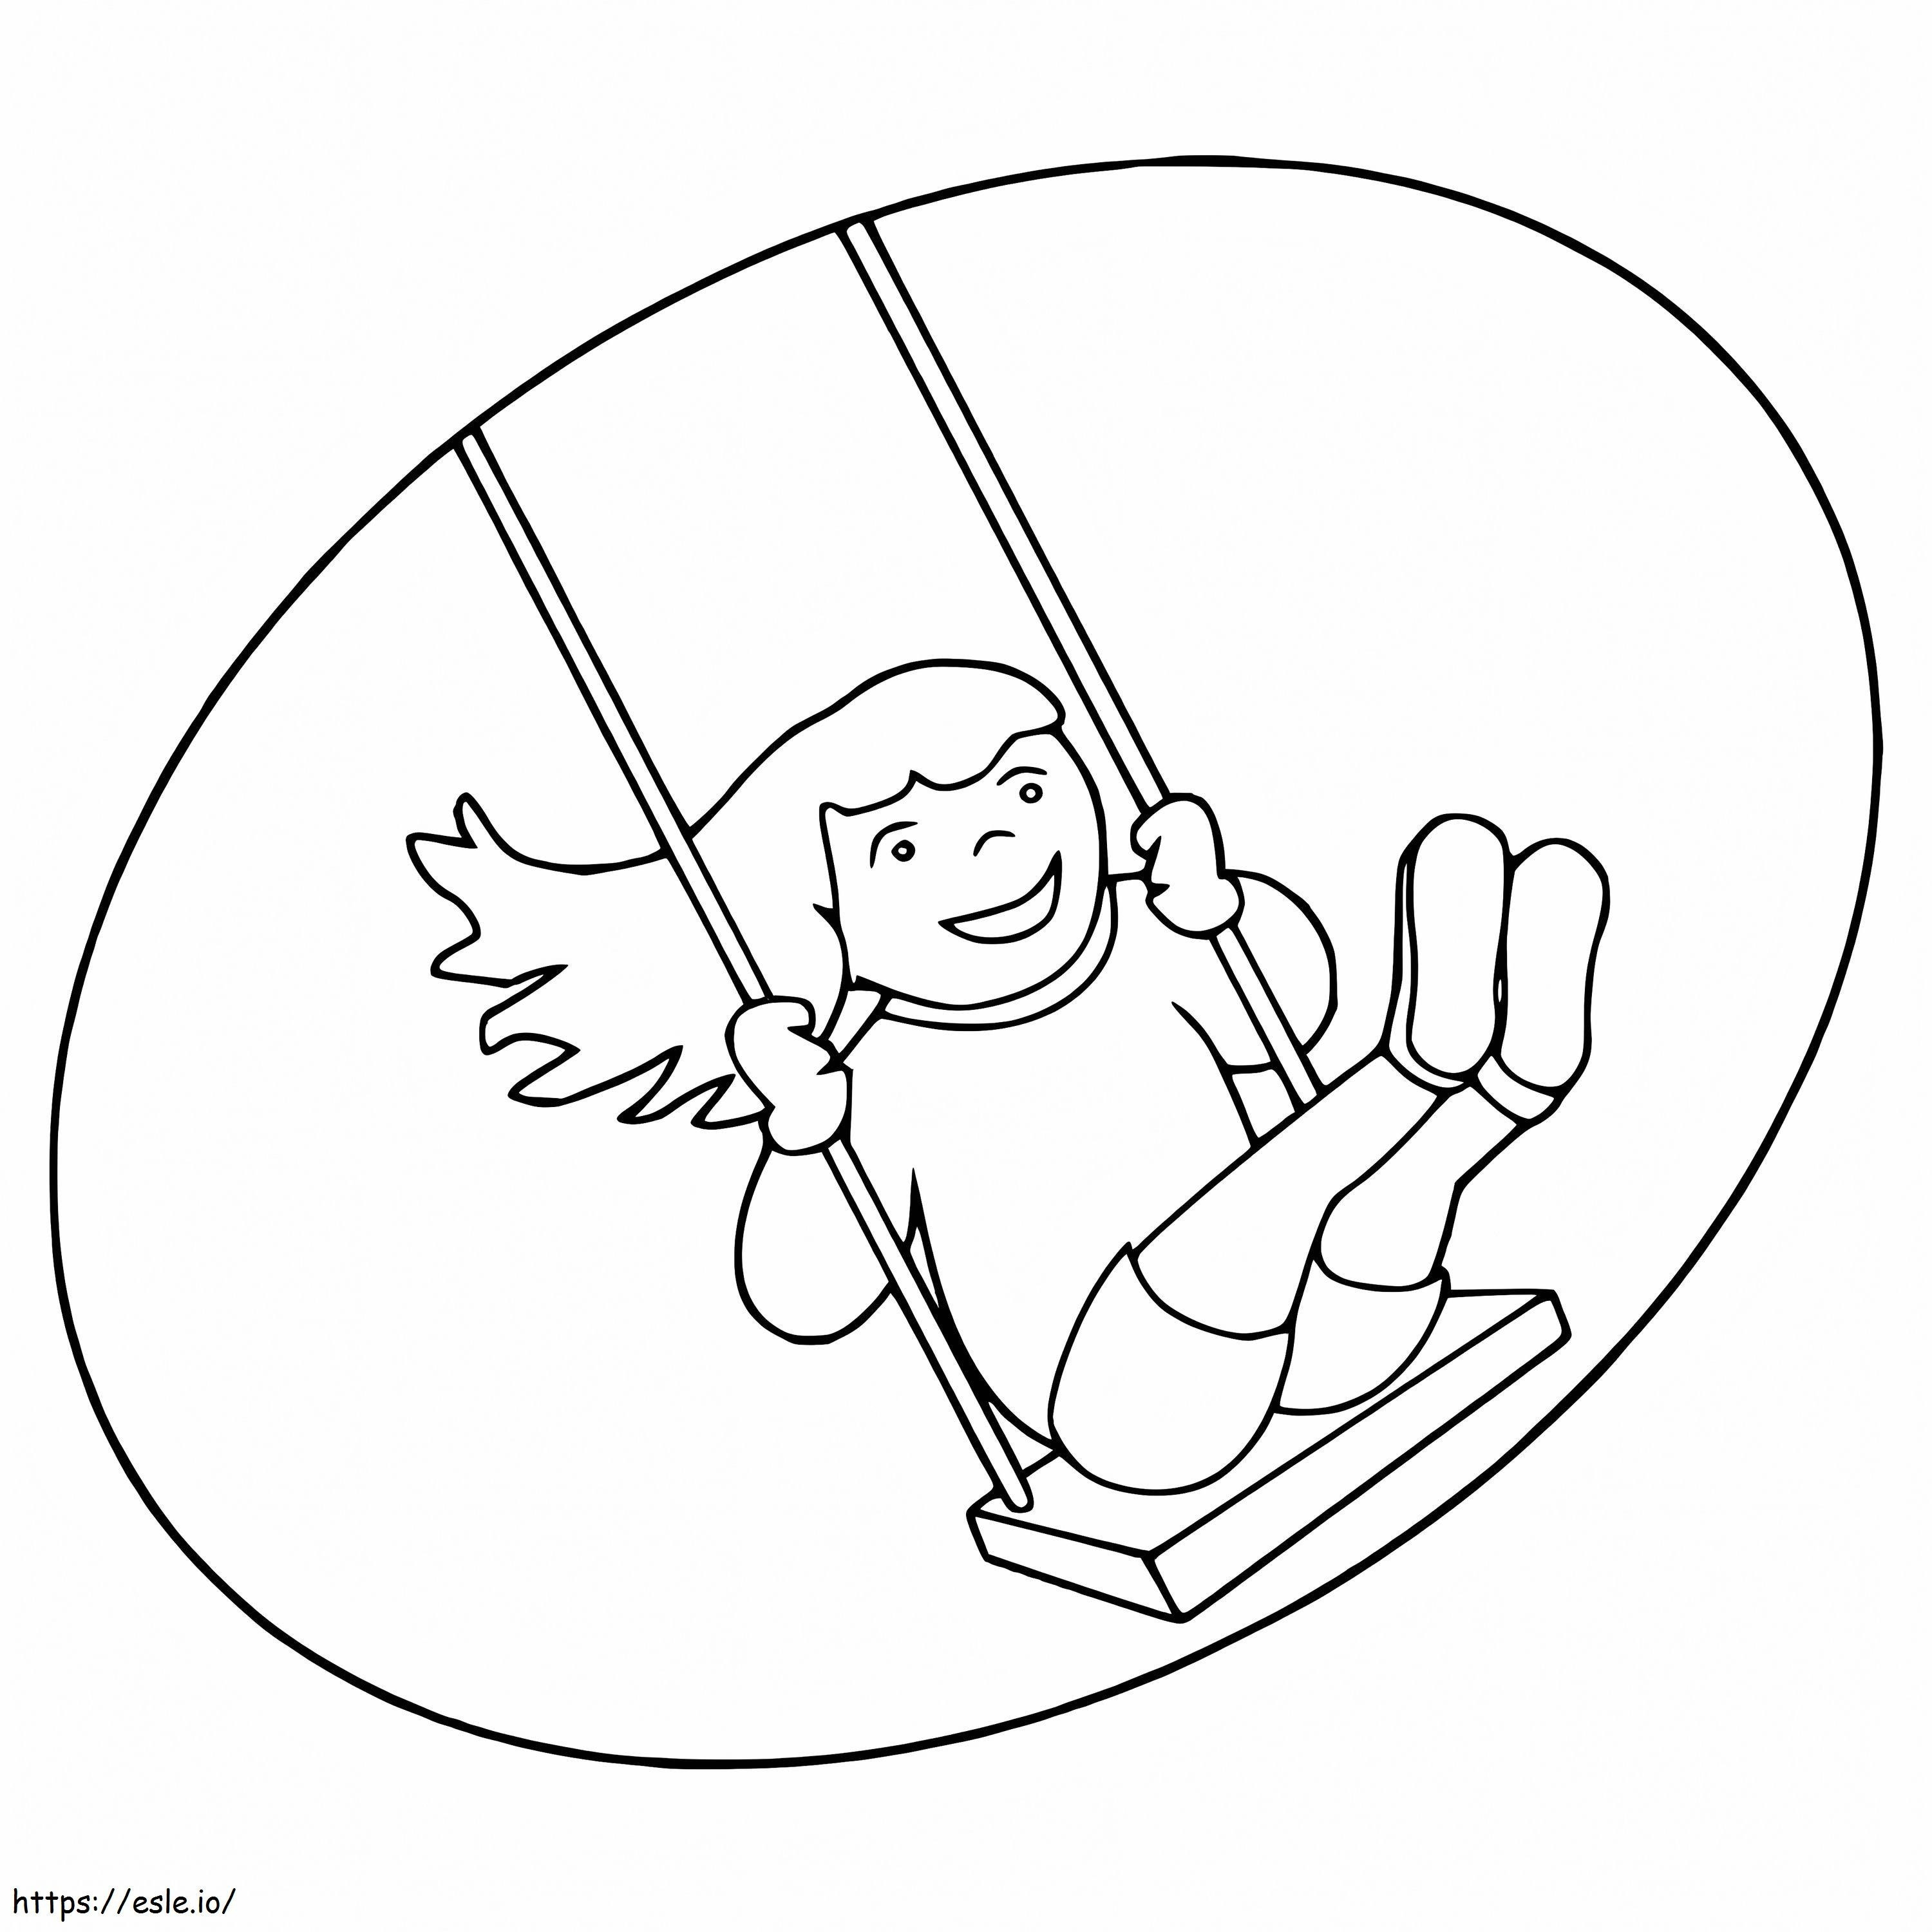 Little Girl On Swing coloring page